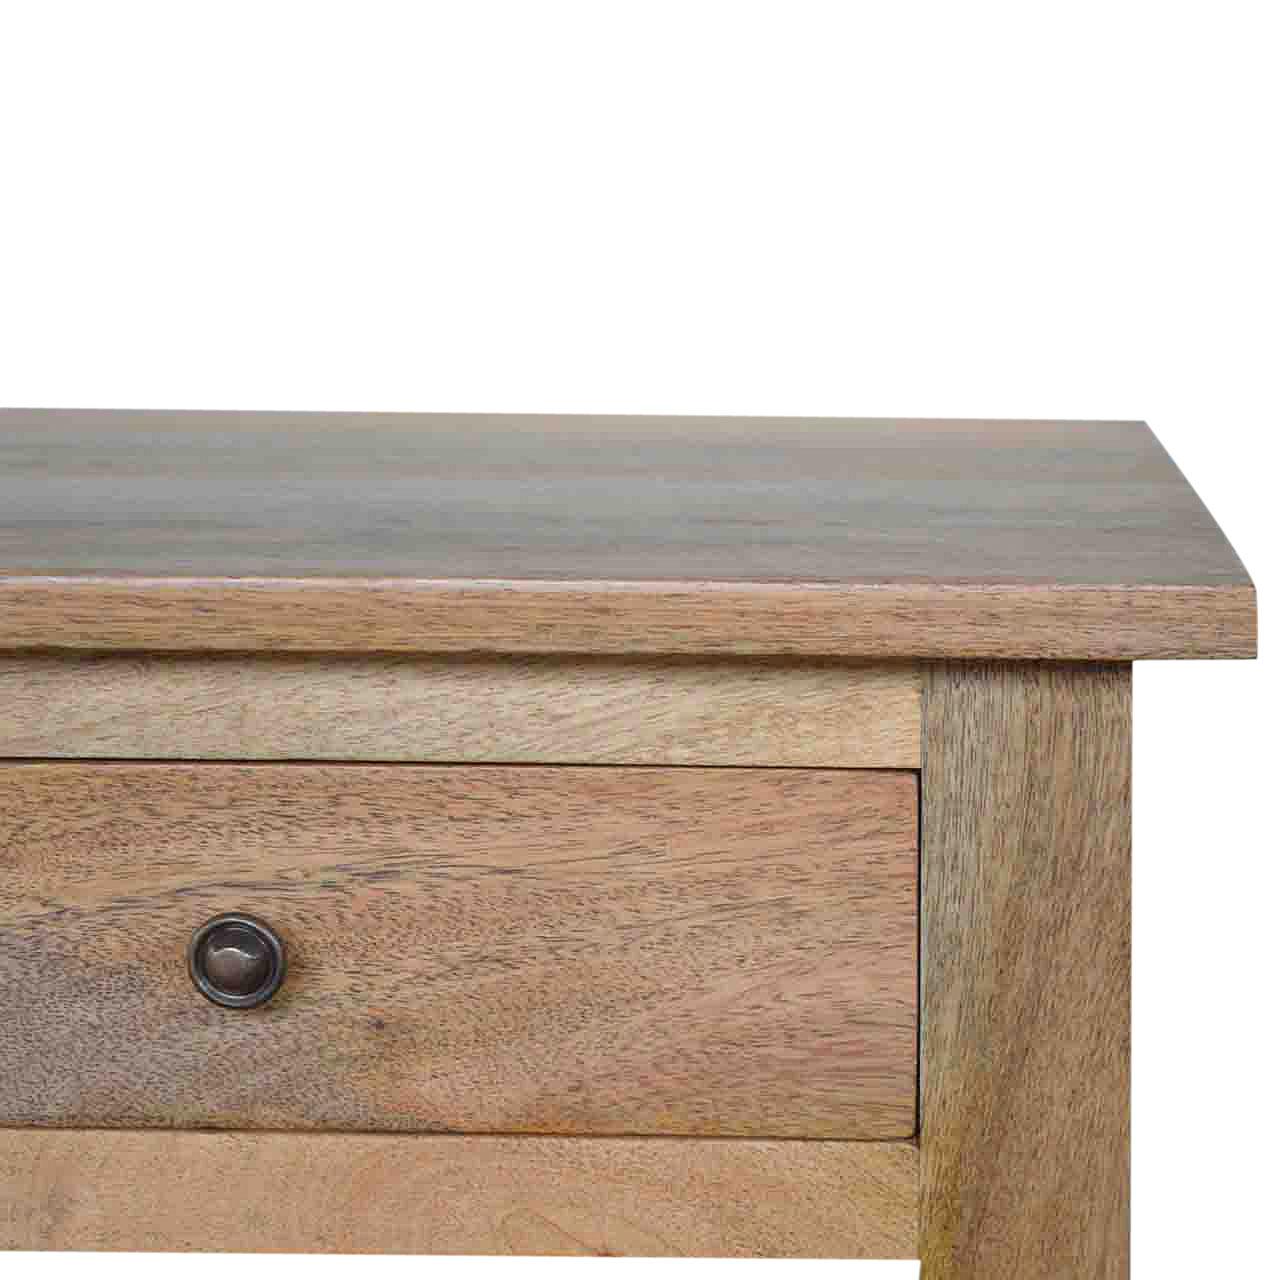 Country Style Coffee Table With 4 Drawers